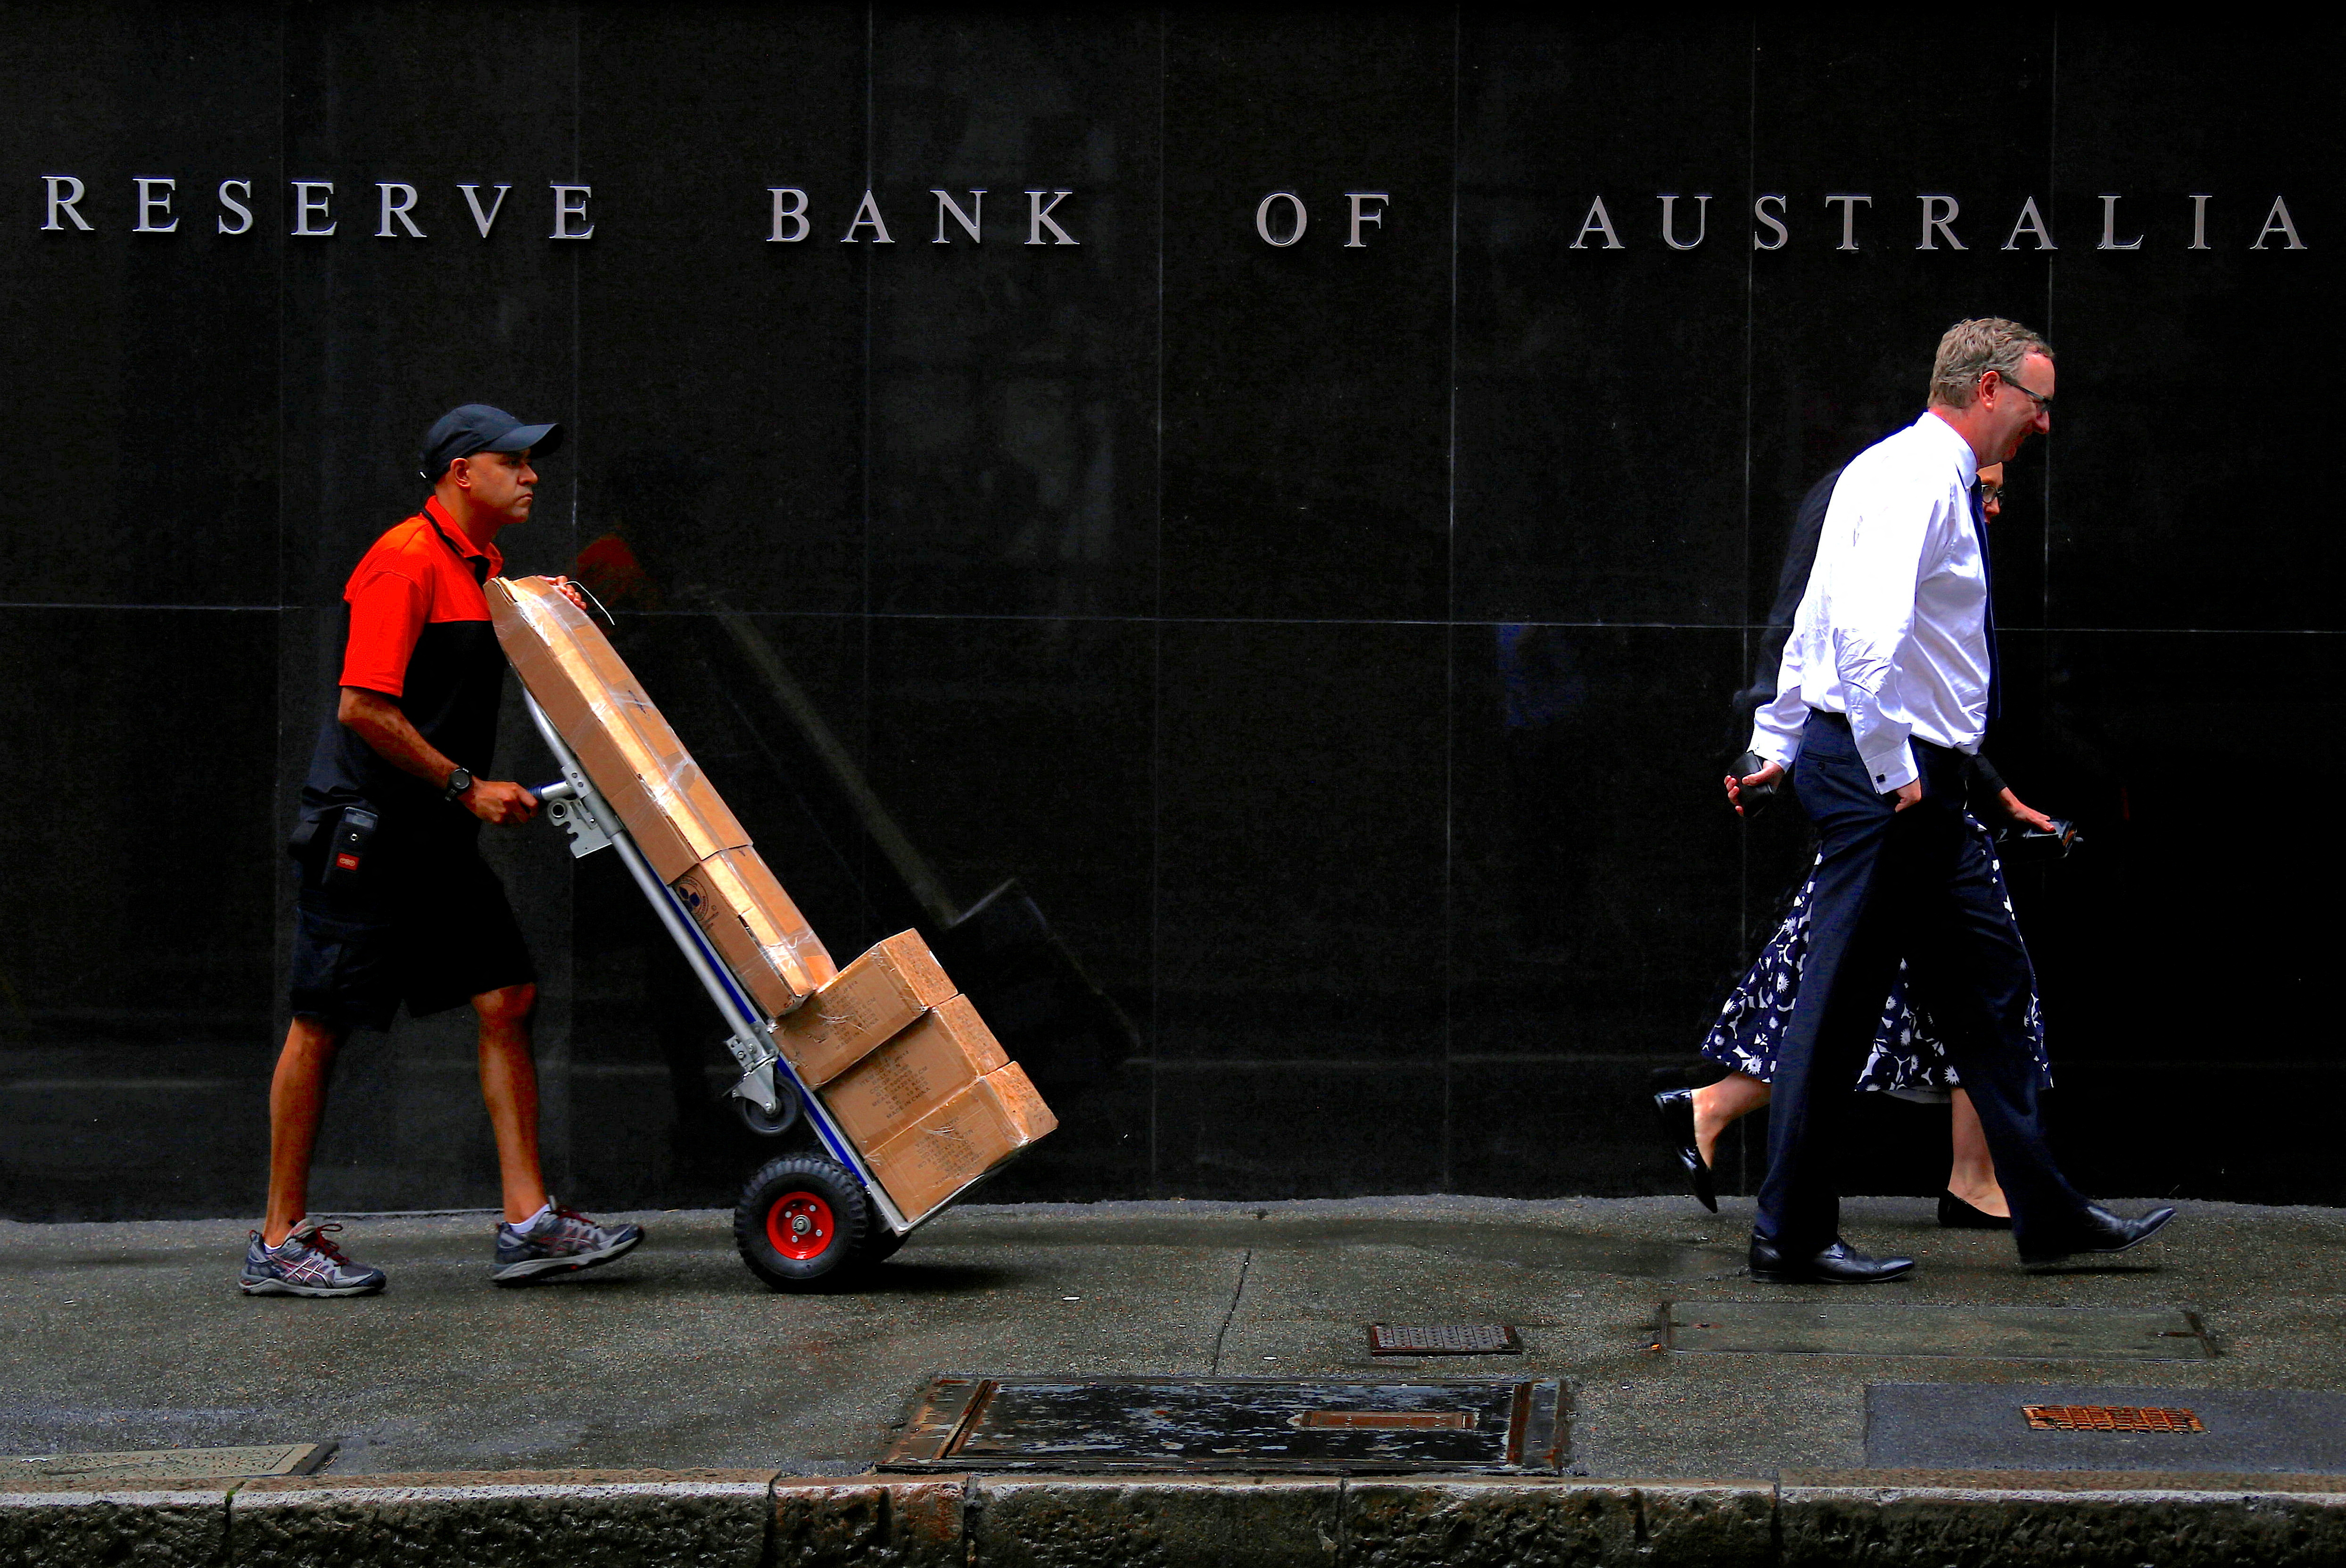 A worker pushing a trolley walks with pedestrians past the Reserve Bank of Australia (RBA) head office in central Sydney